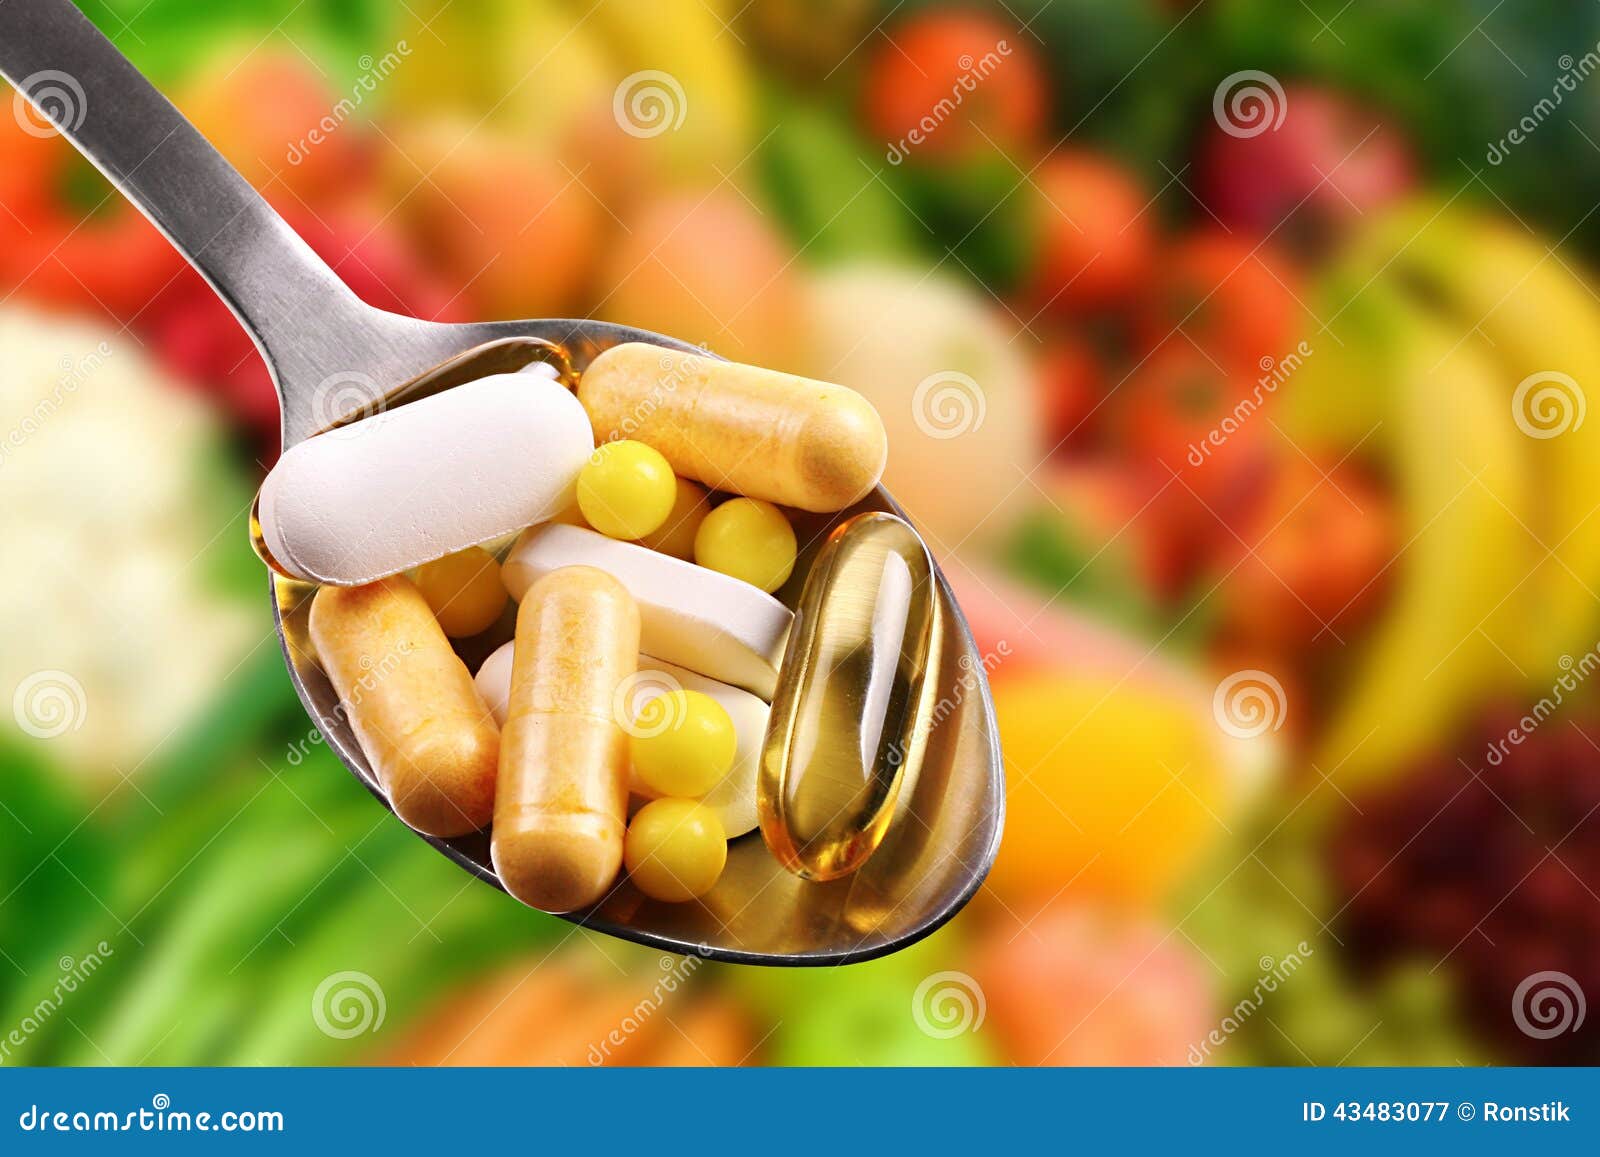 spoon with dietary supplements